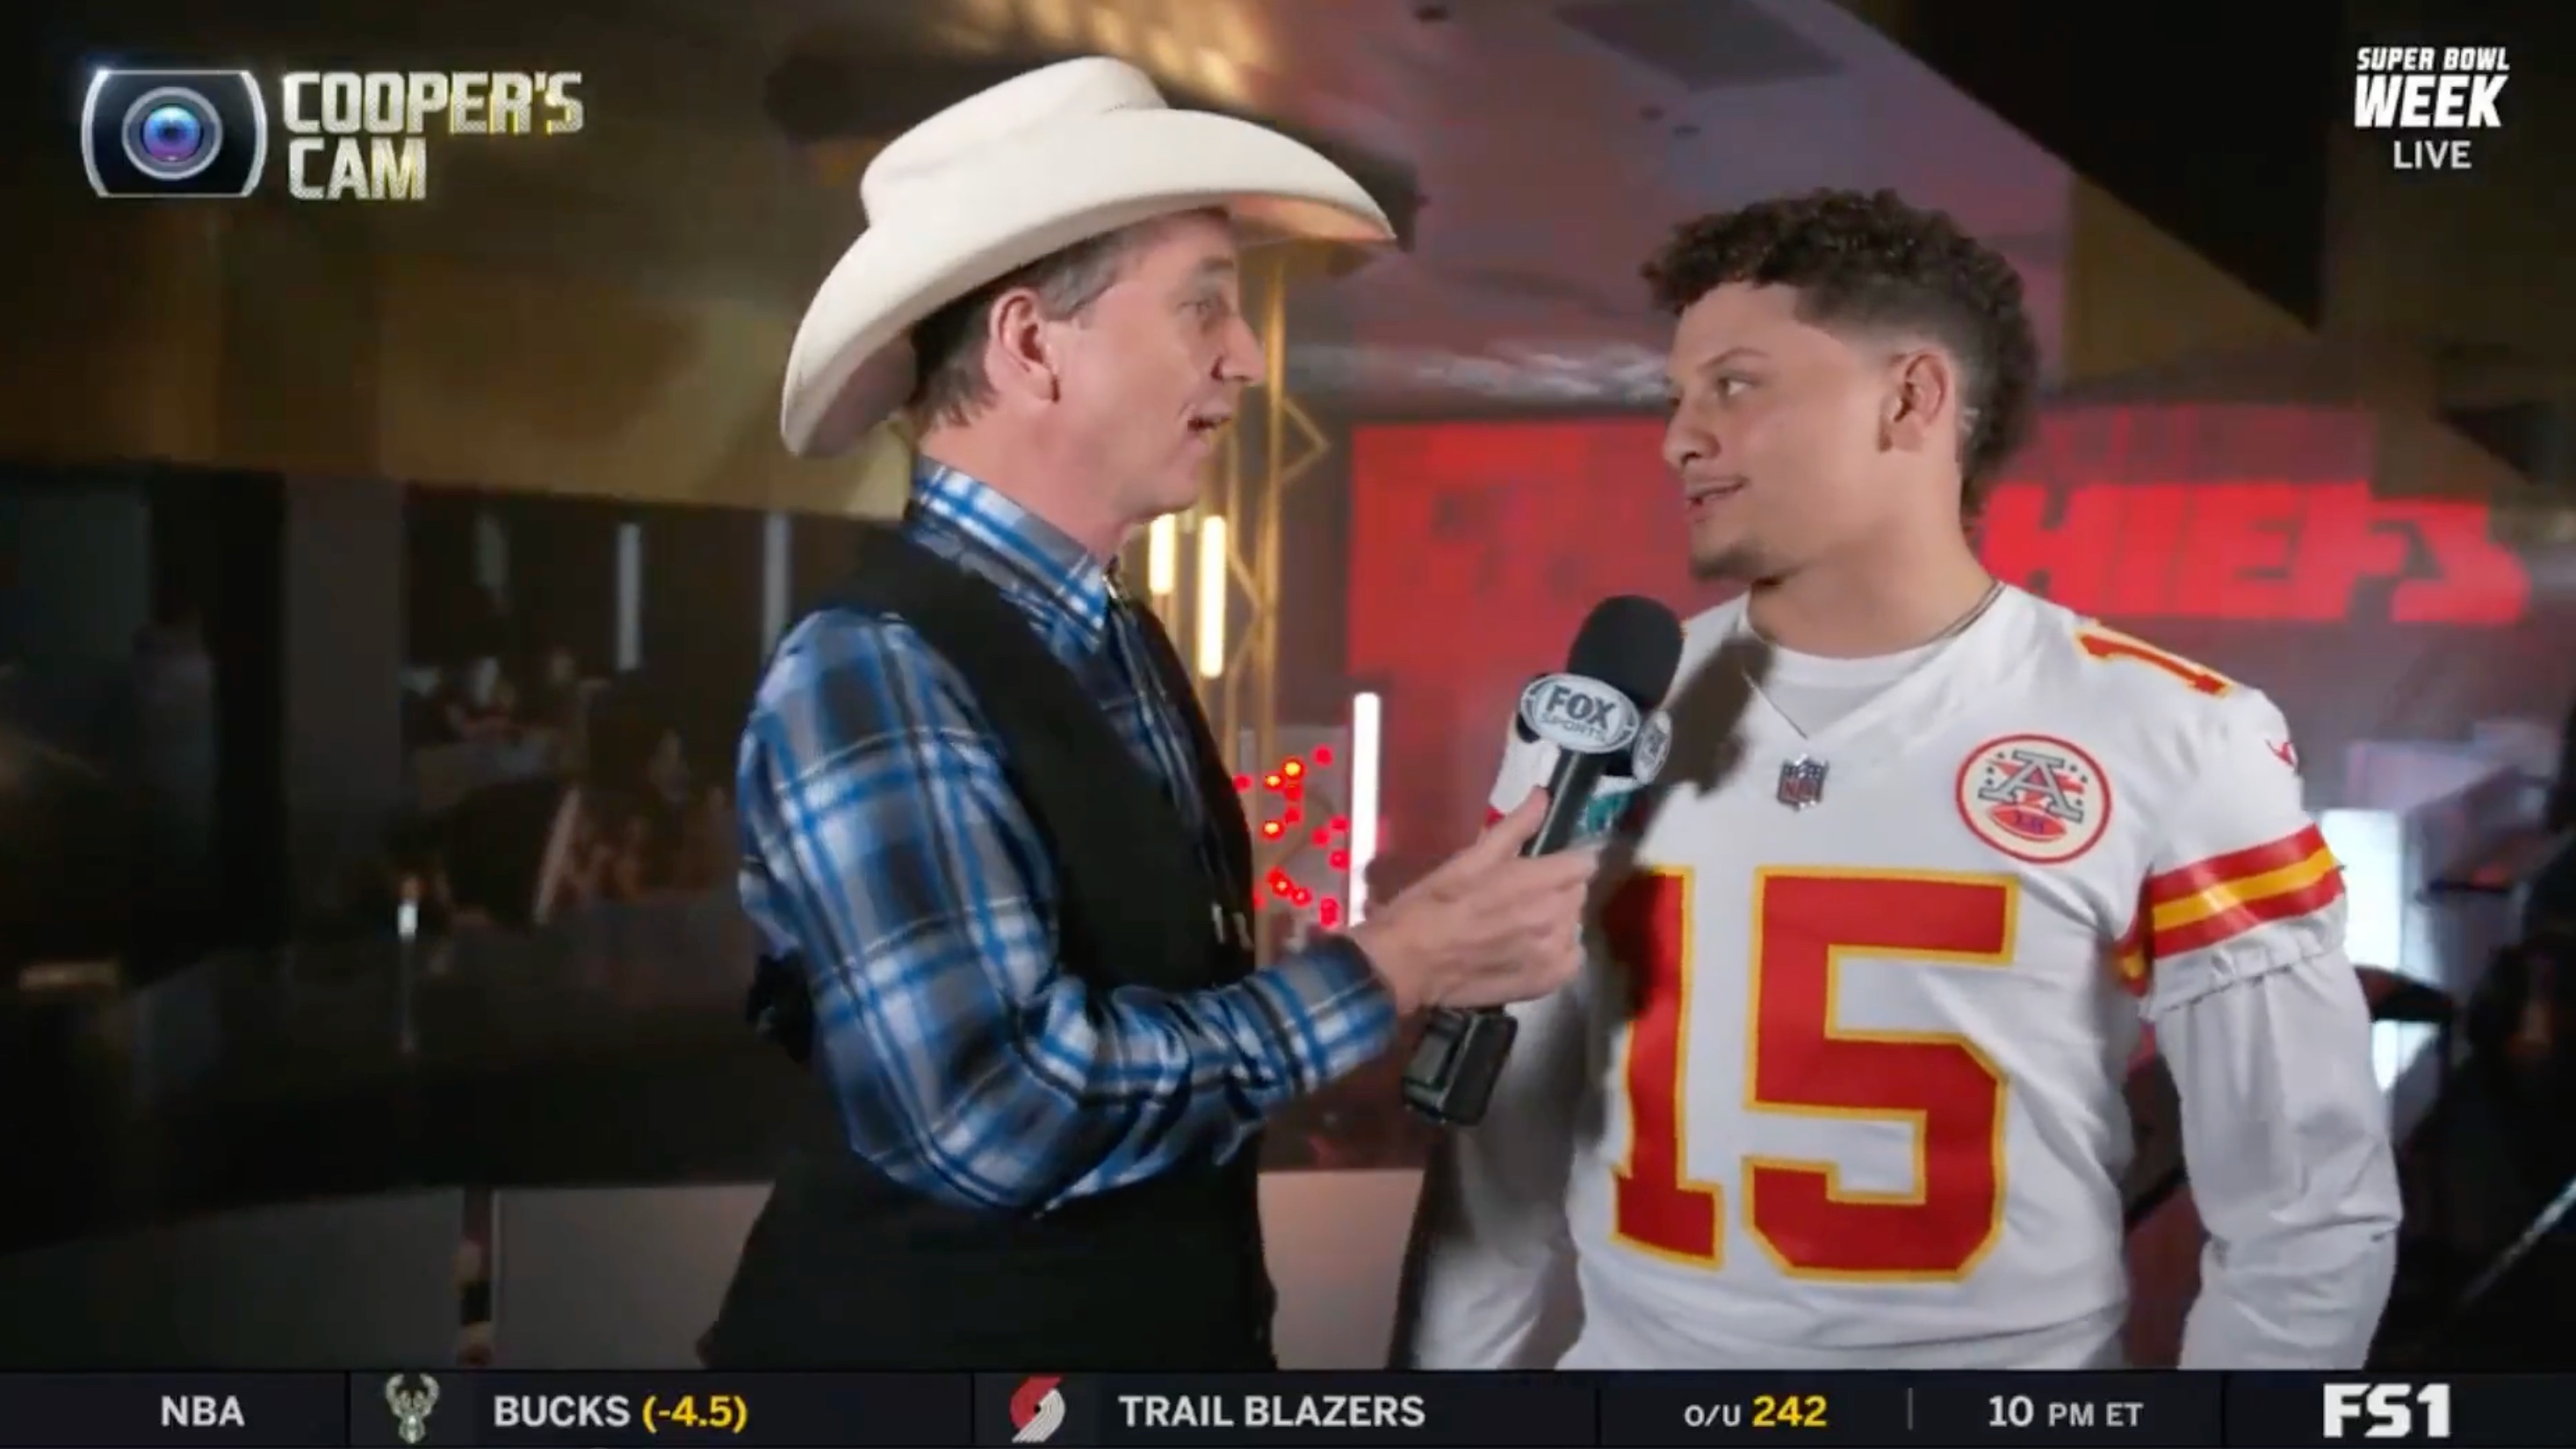 Patrick Mahomes and Cooper Manning